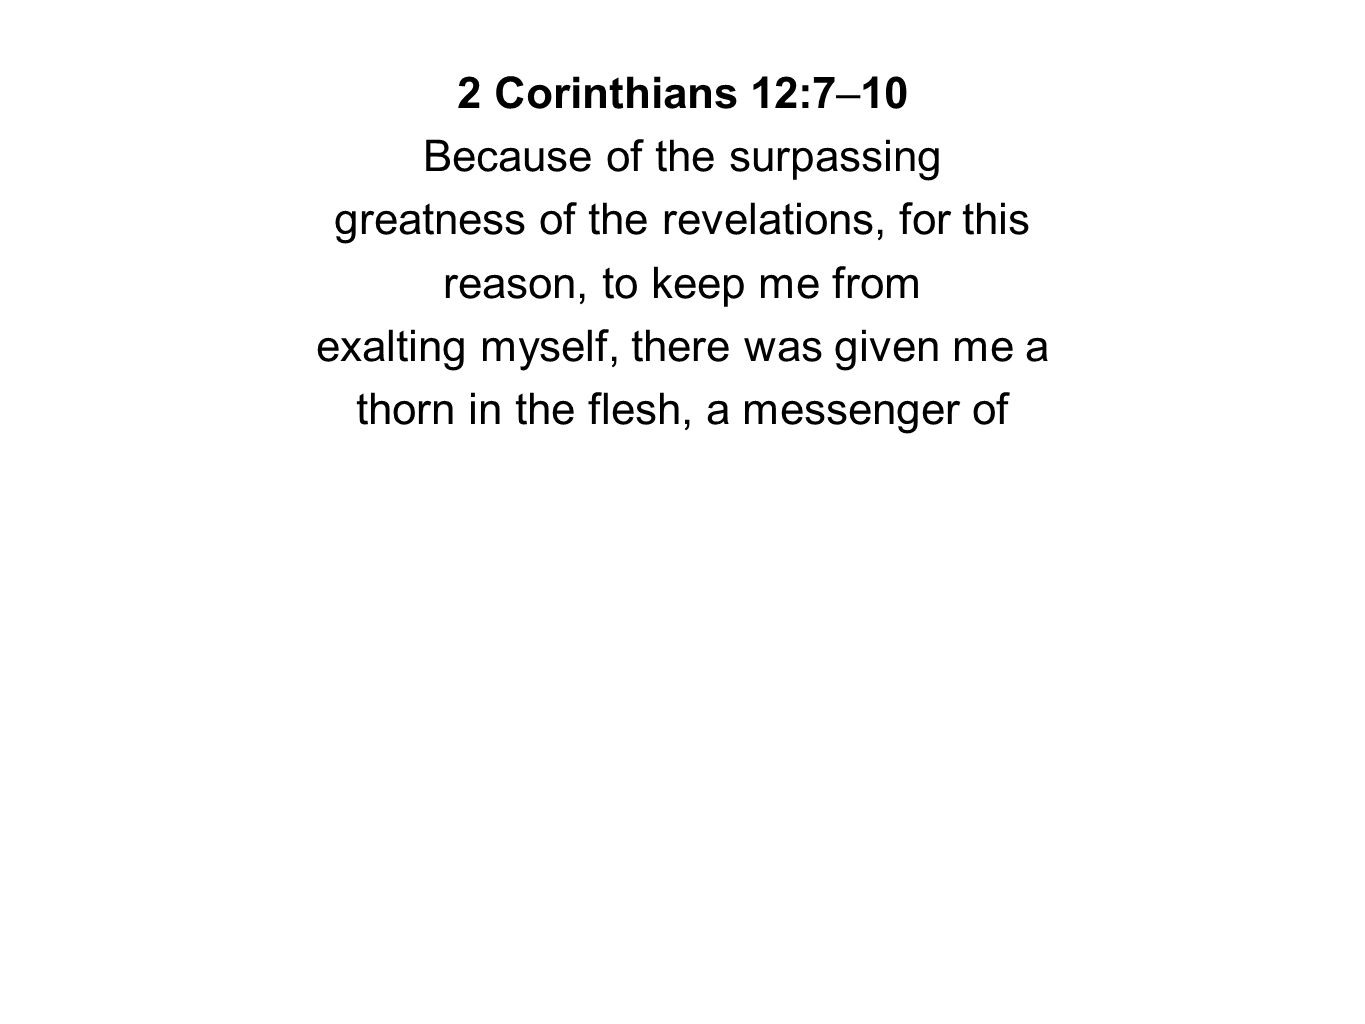 2 Corinthians 12:7–10 Because of the surpassing greatness of the revelations, for this reason, to keep me from exalting myself, there was given me a thorn in the flesh, a messenger of